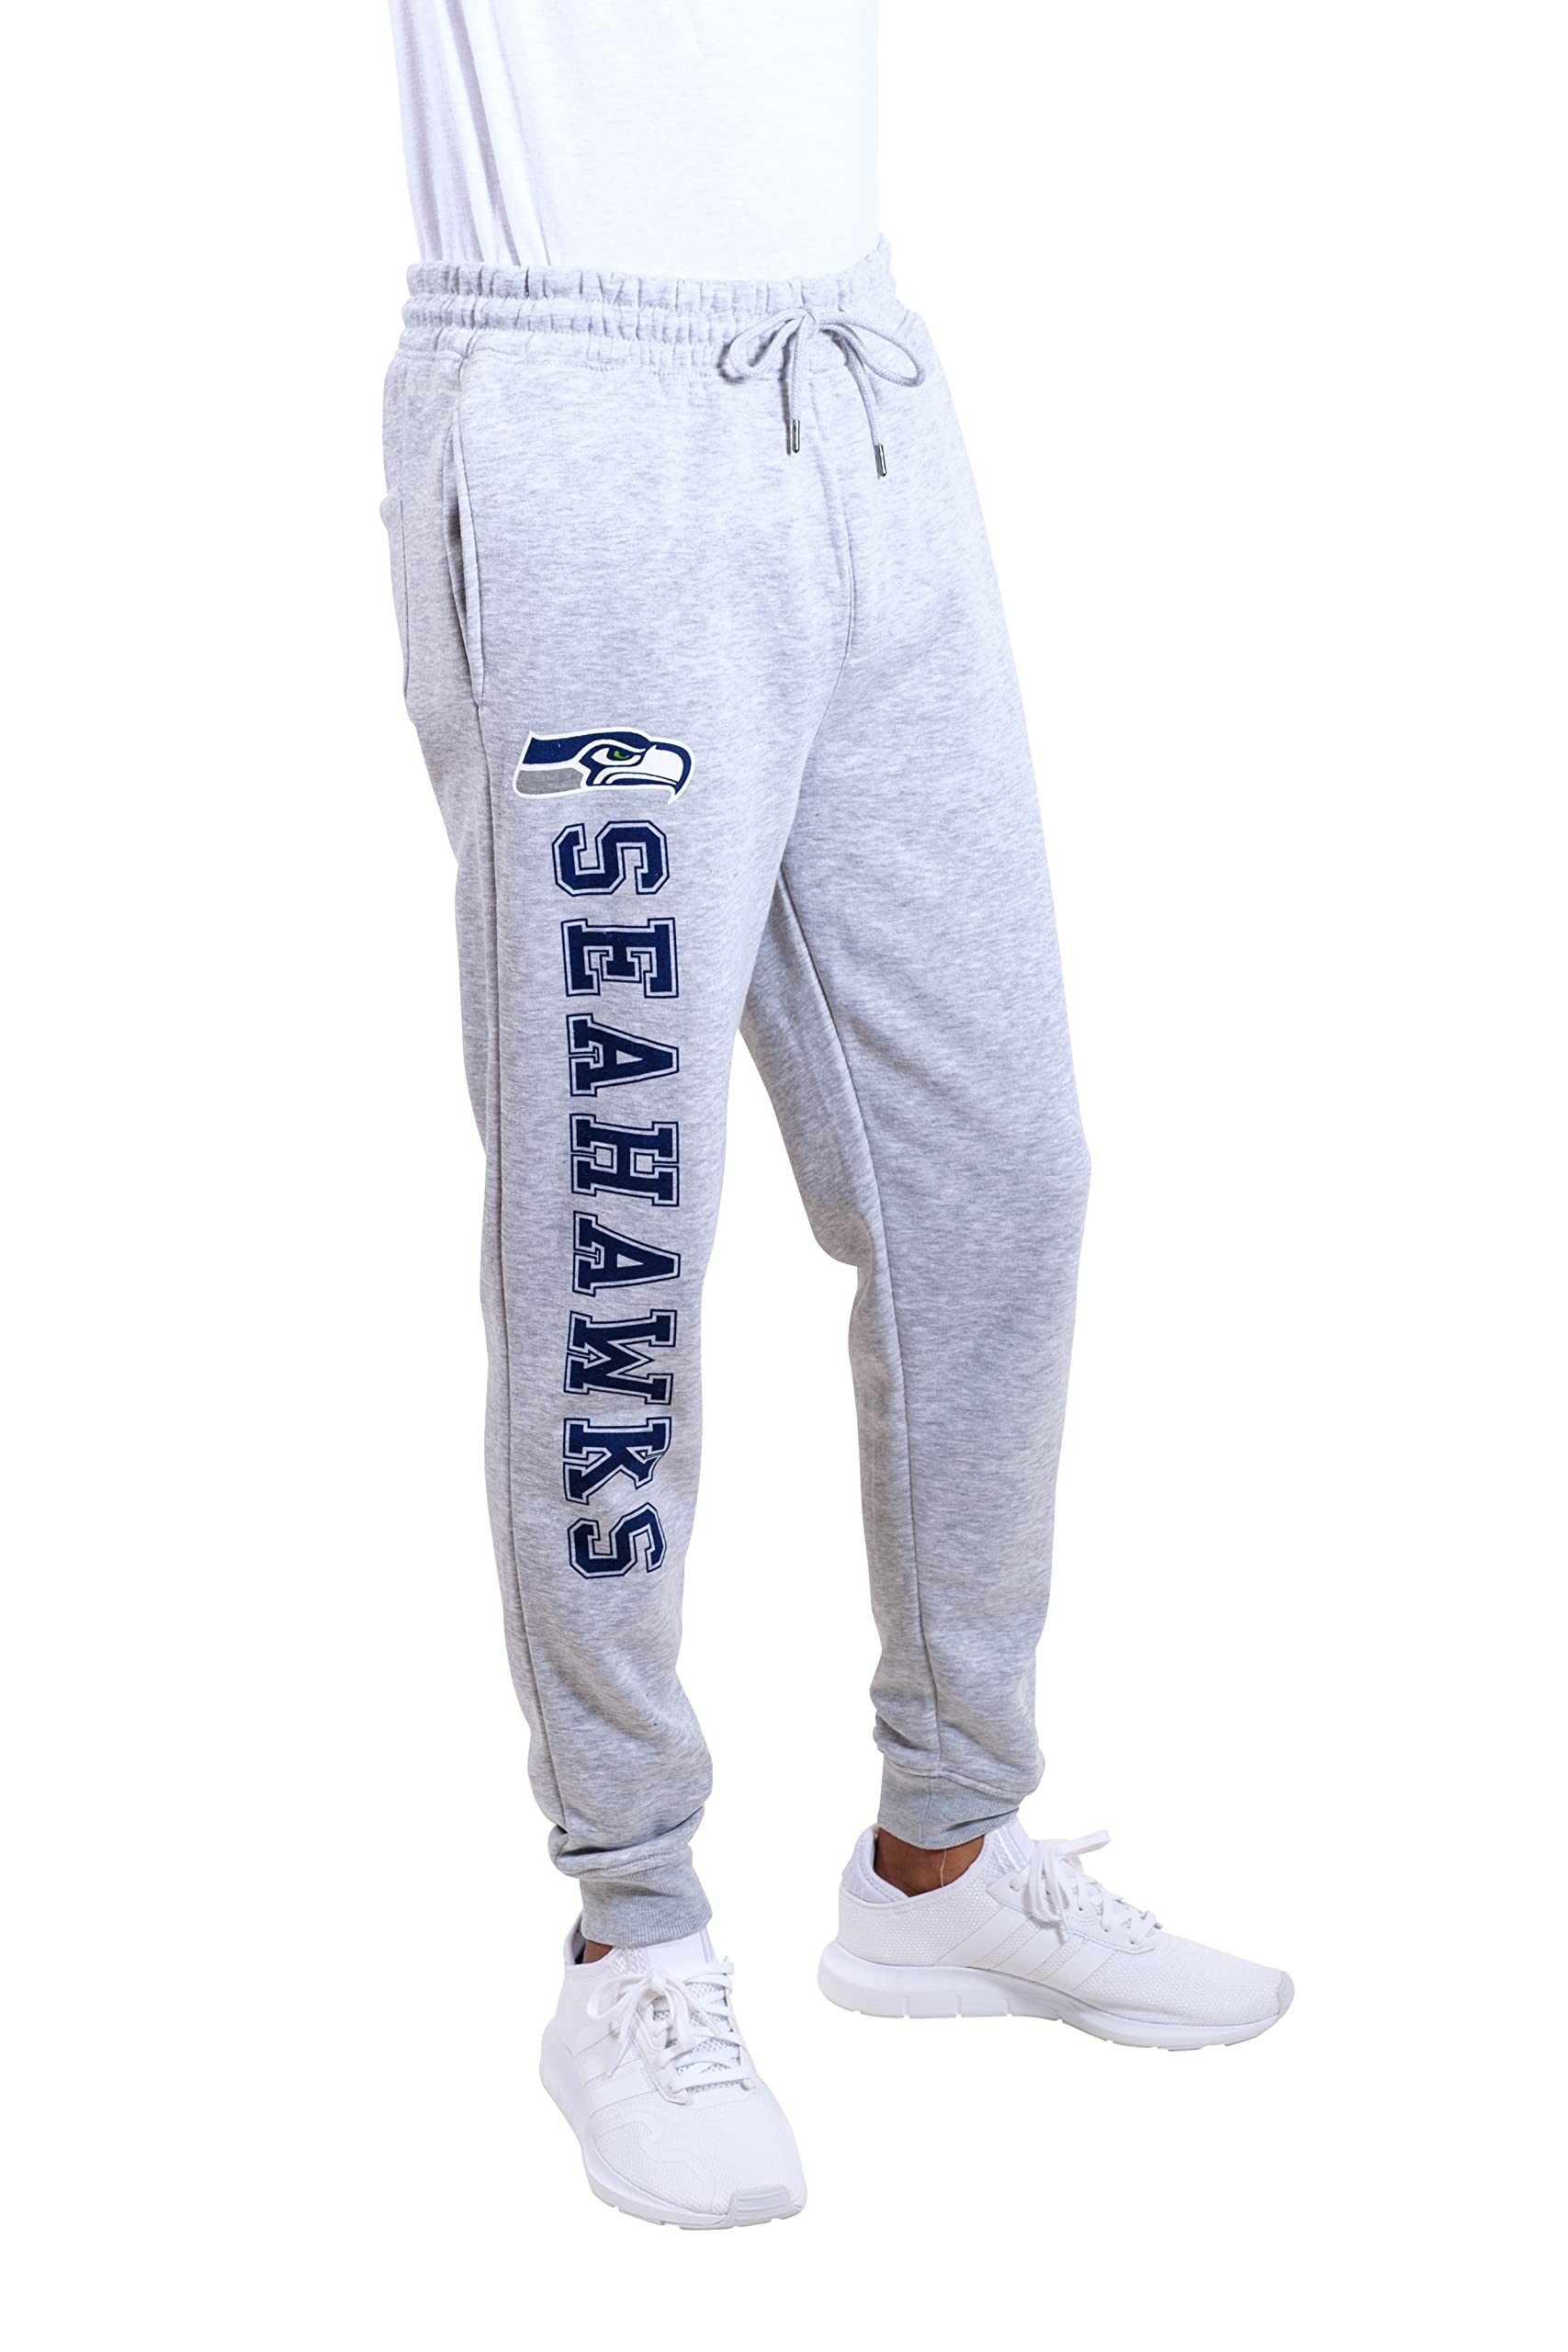 Ultra Game NFL Seattle Seahawks Mens Super Soft Game Day Jogger Sweatpants|Seattle Seahawks